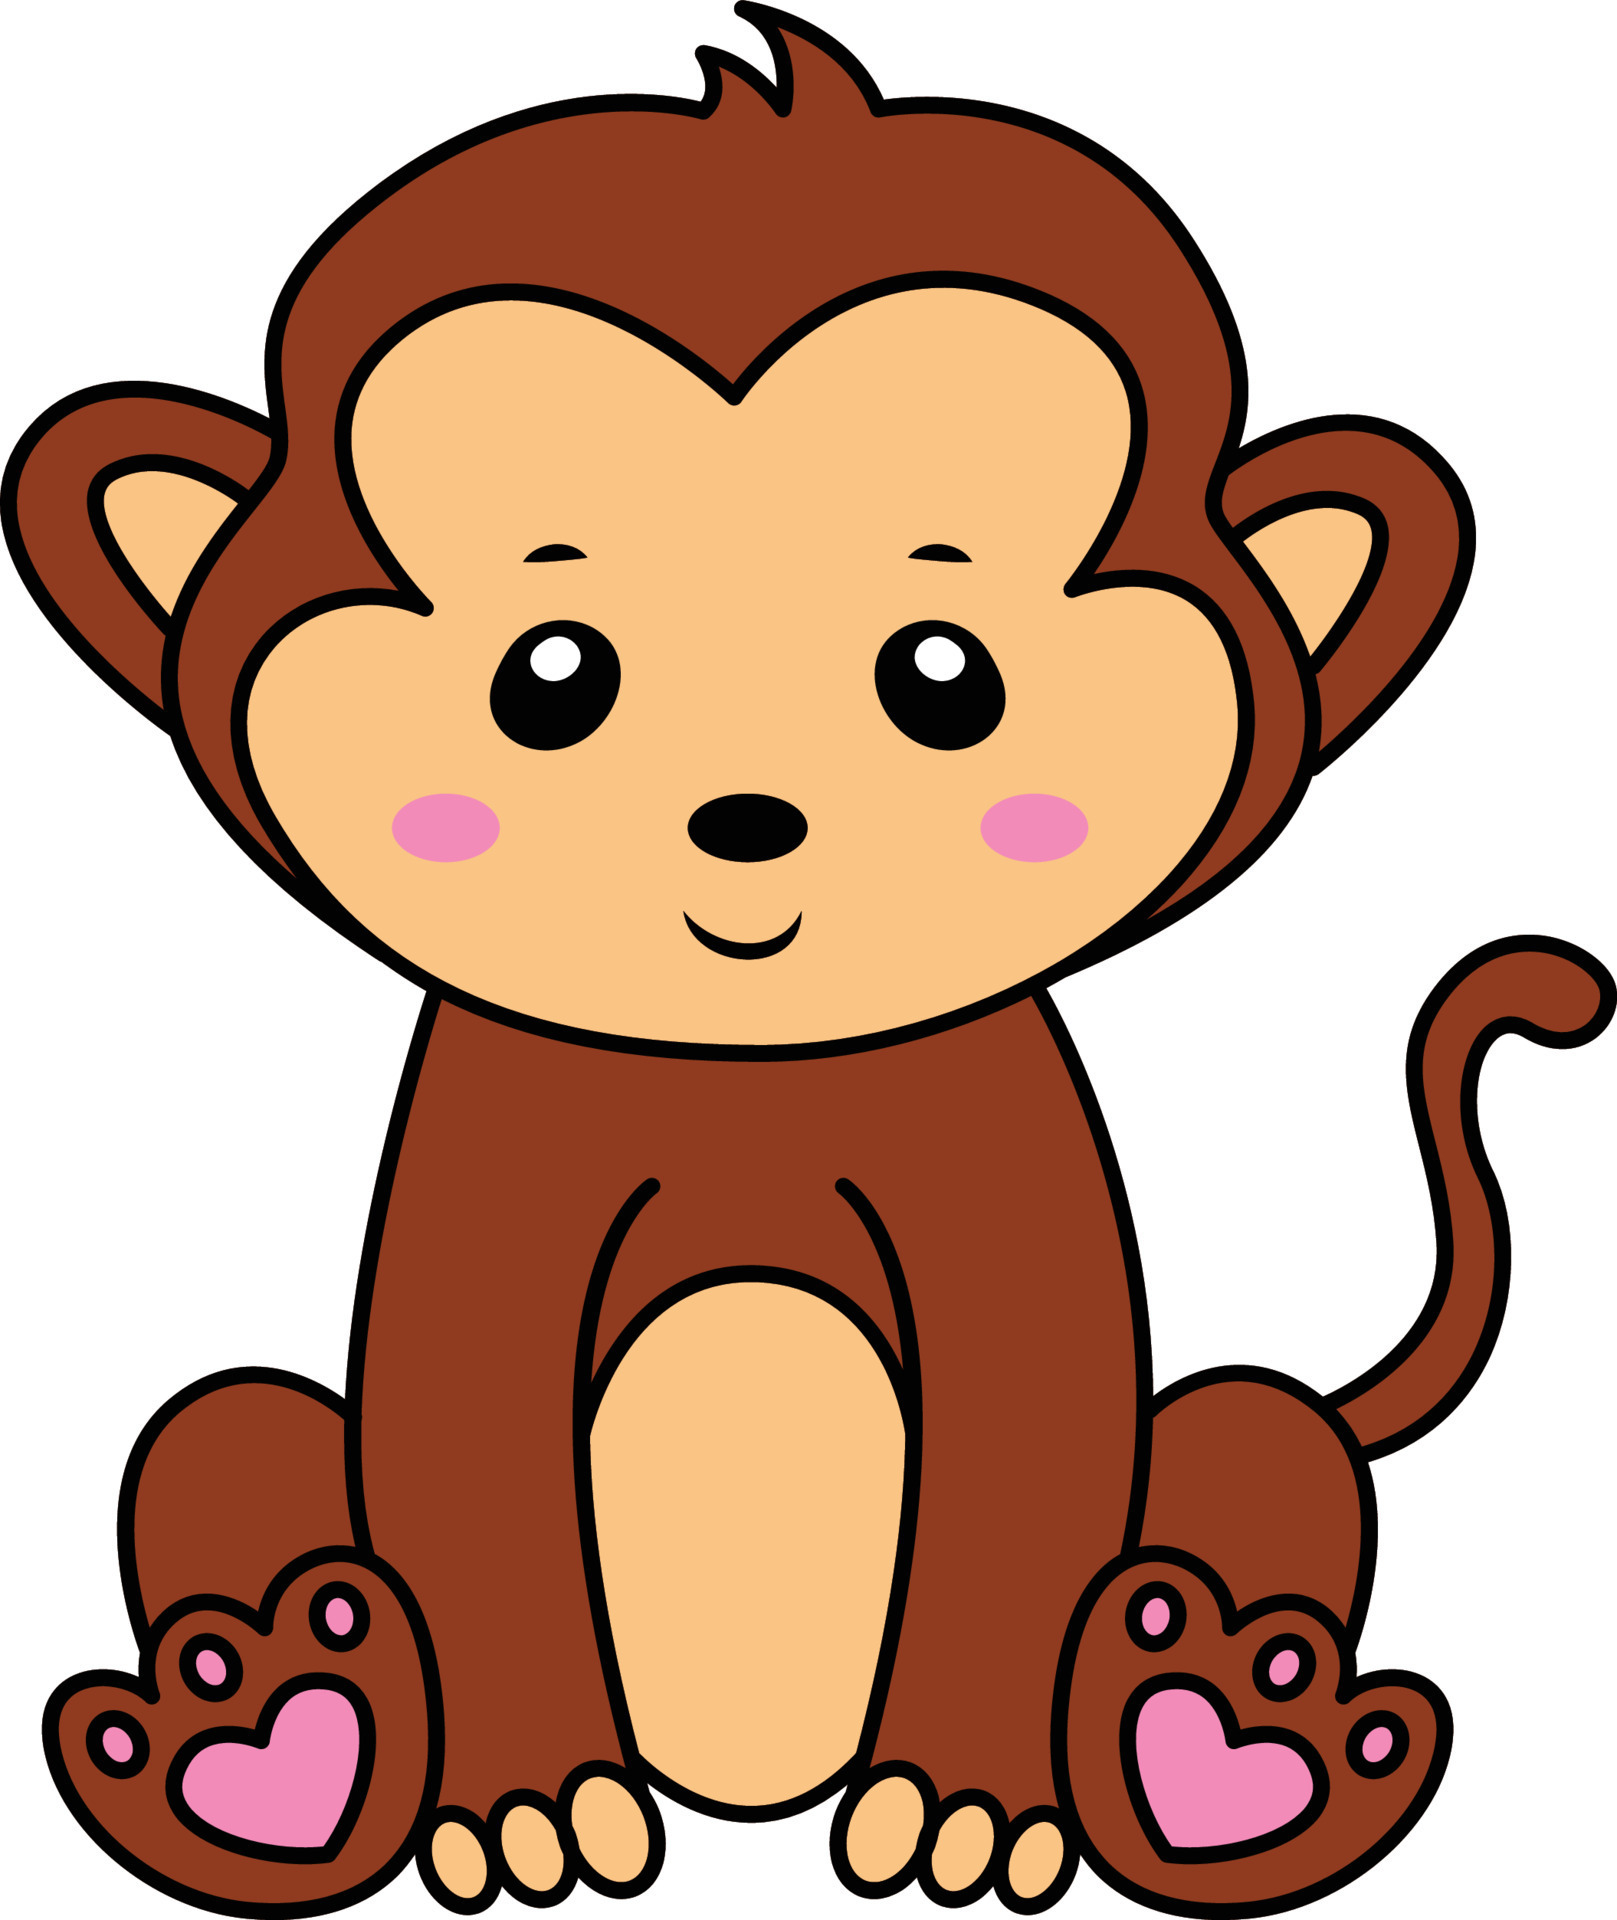 How to draw a cute monkey easy step by step - YouTube